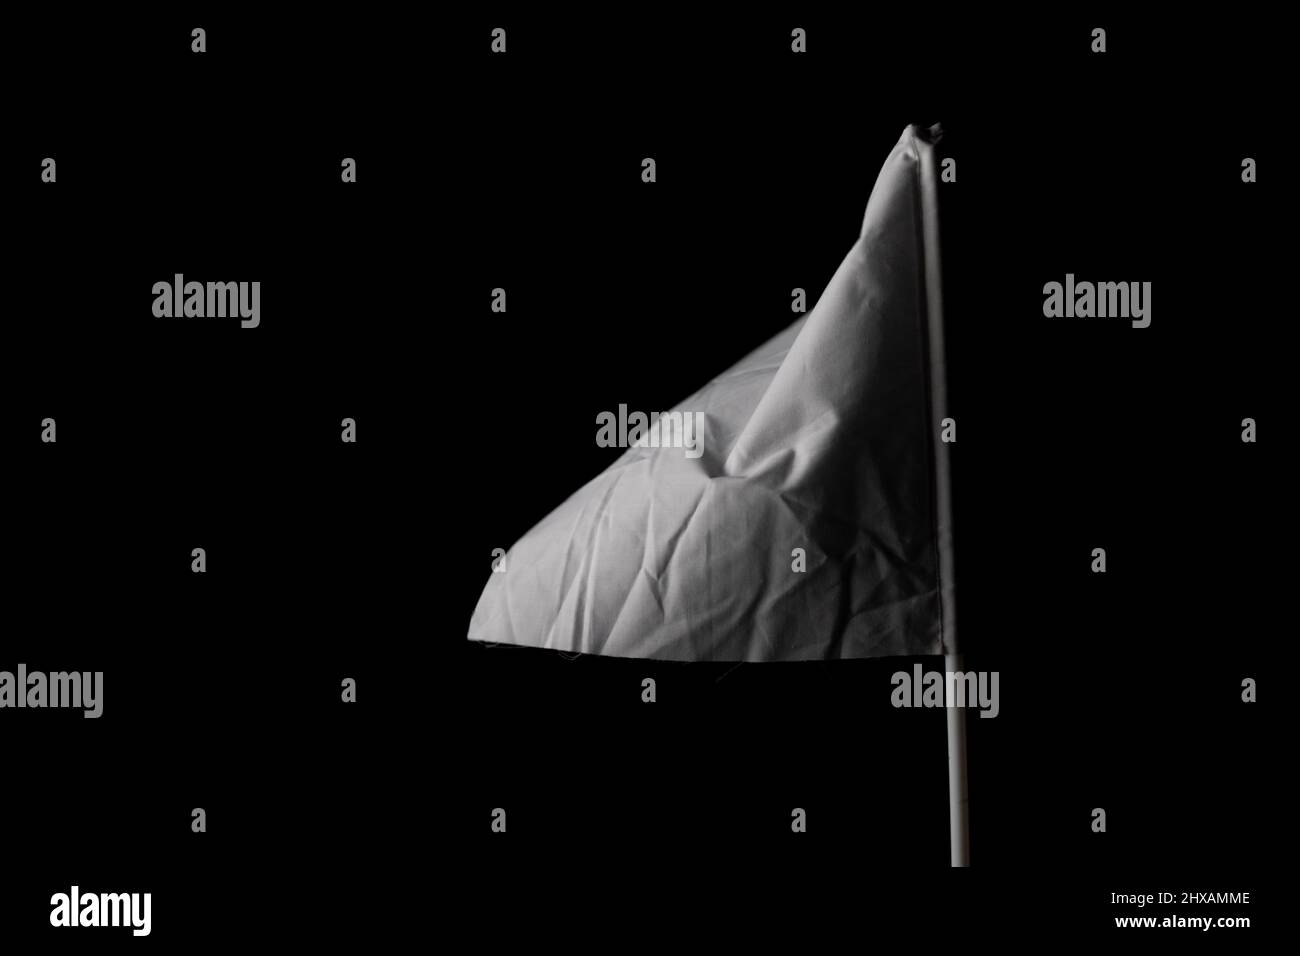 High ISO images of waving White flag on dark background with copy space - concept of symbol of peace, activist and demonstration. Stock Photo